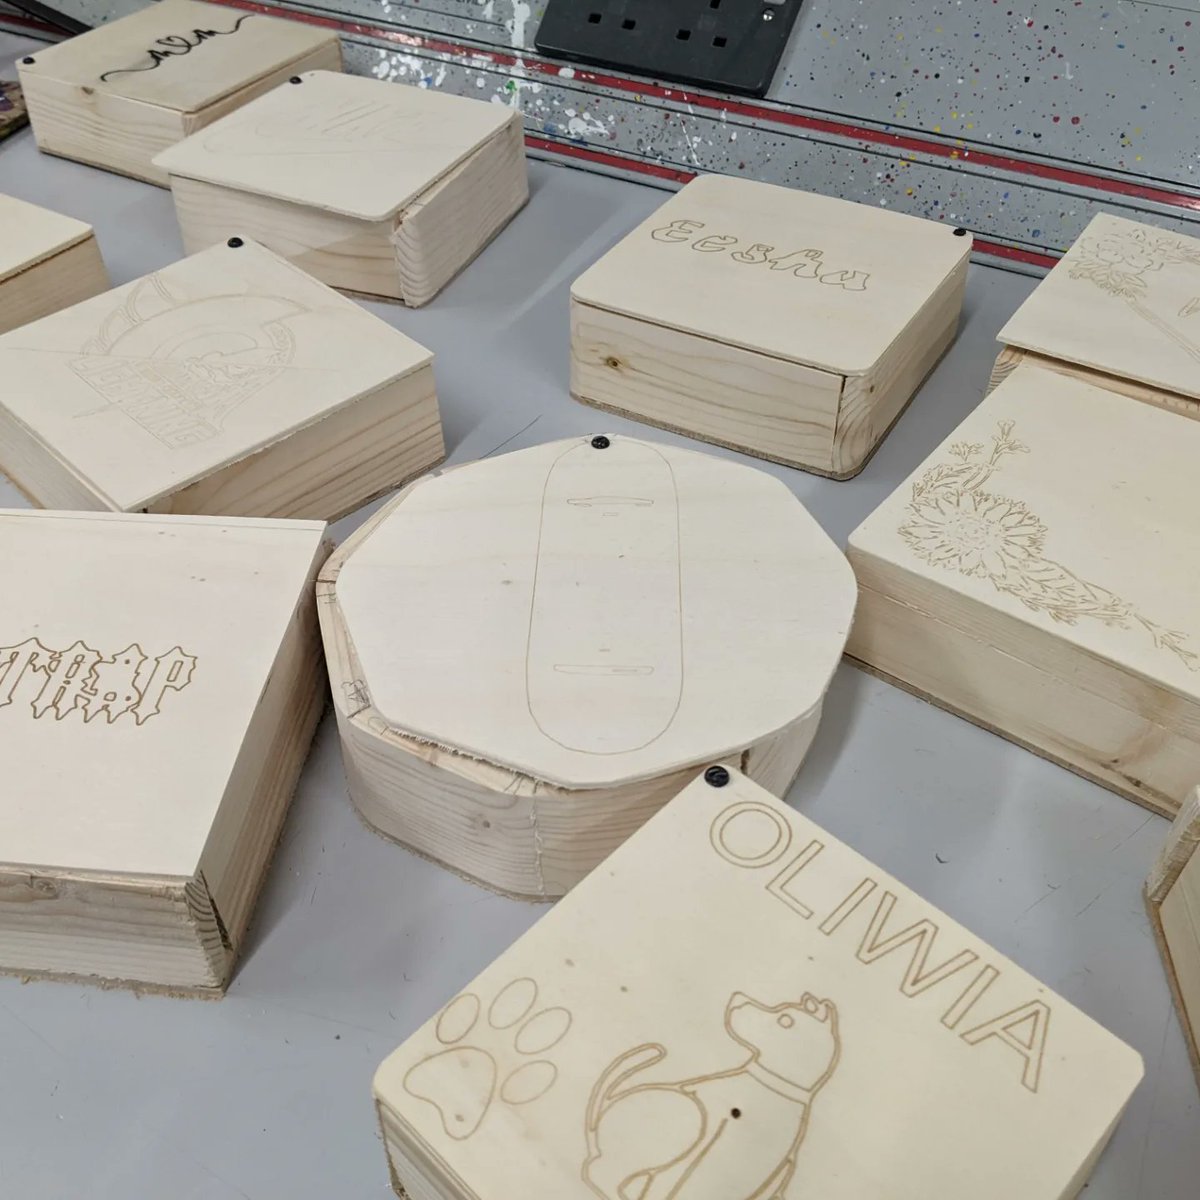 Terrific timbers! @GoldingtonAcad students have mastered the timber challenge of creating different joints. Learning lots about sustainably sourced timbers, applying CAD/CAM knowledge to produce some great products! #timber #designmatters #computeraideddesign @TechSoft_UK